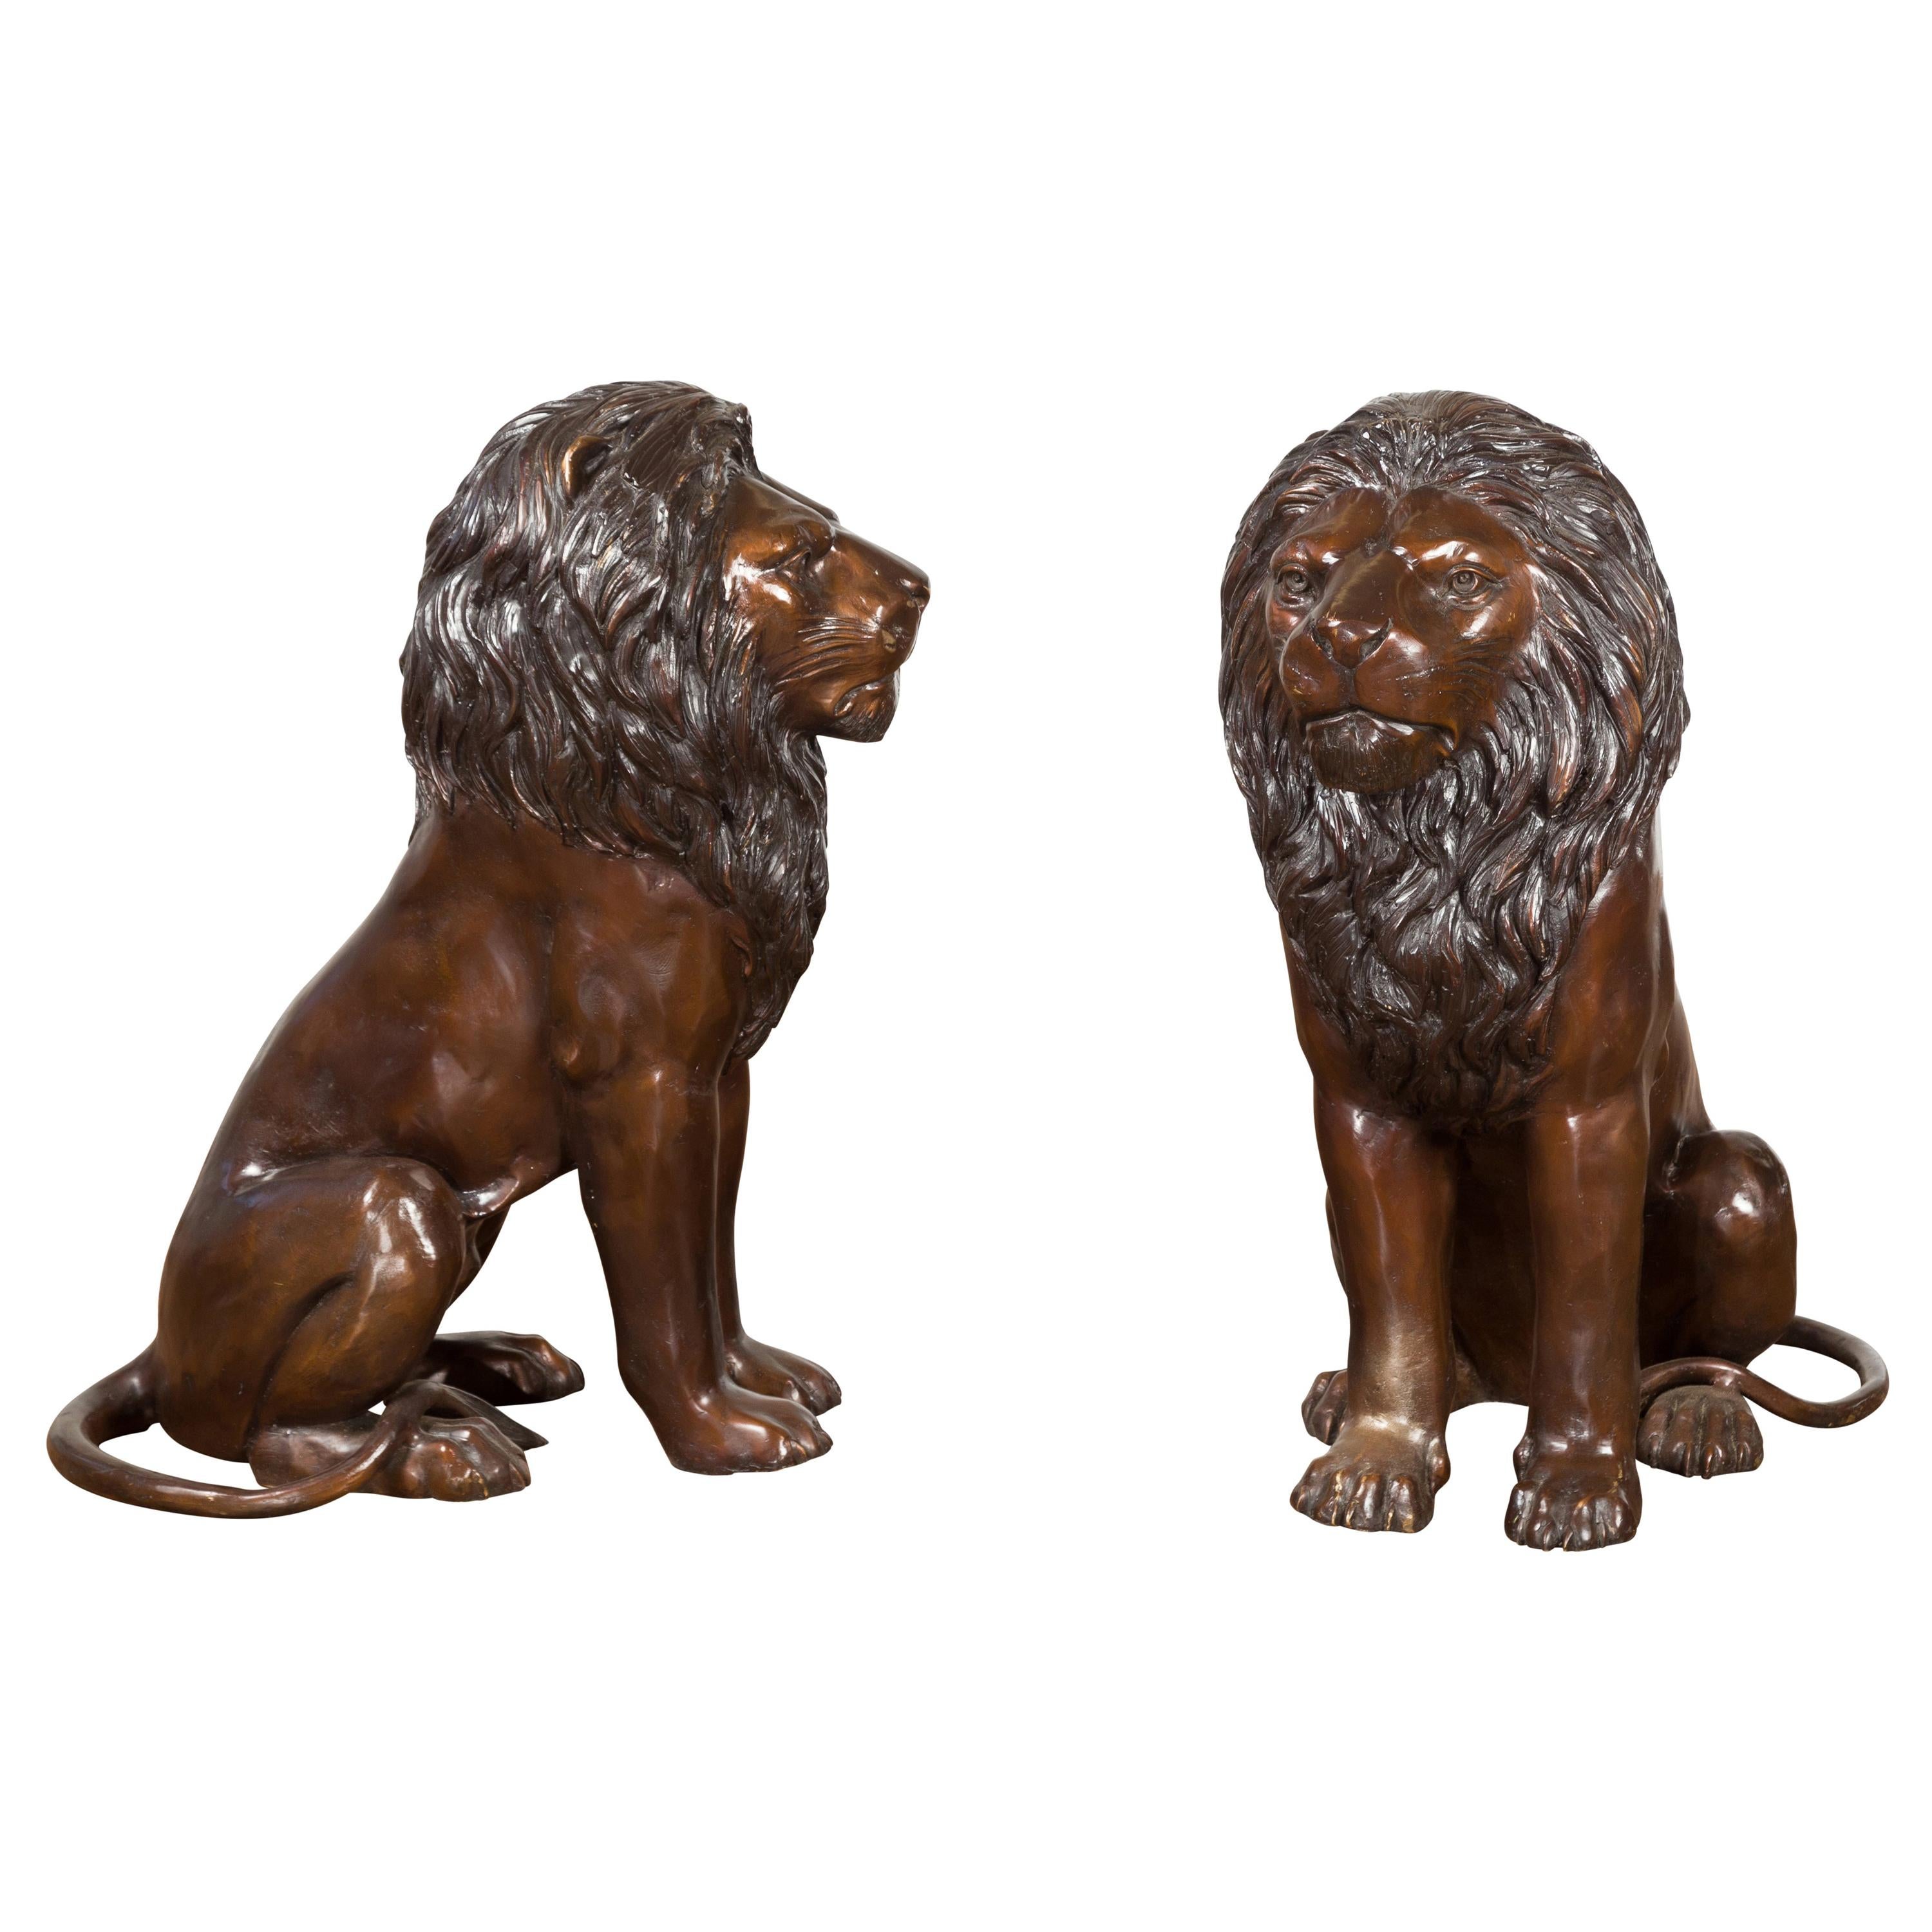 Pair of Contemporary Lost Wax Cast Outdoor Sitting Lions with Dark Bronze Patina